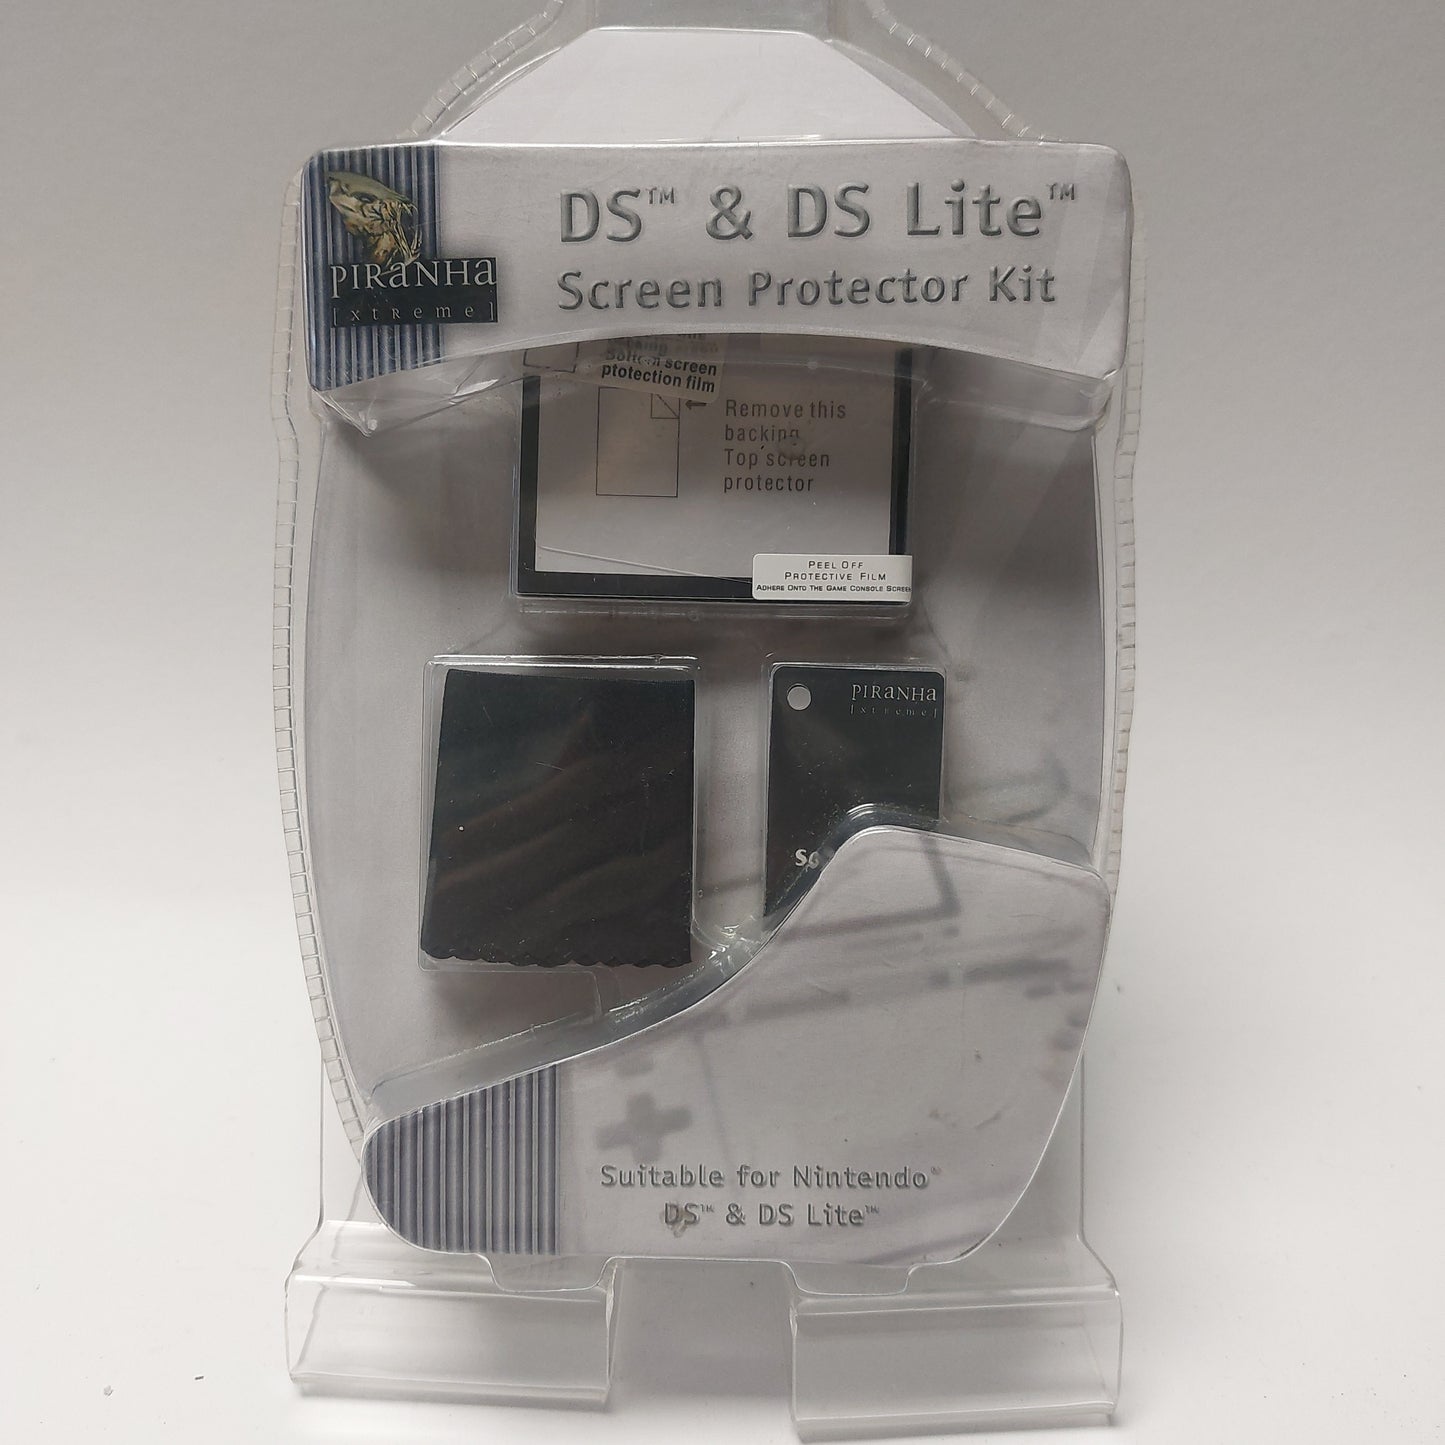 DS (Lite) Screen Protector Kit